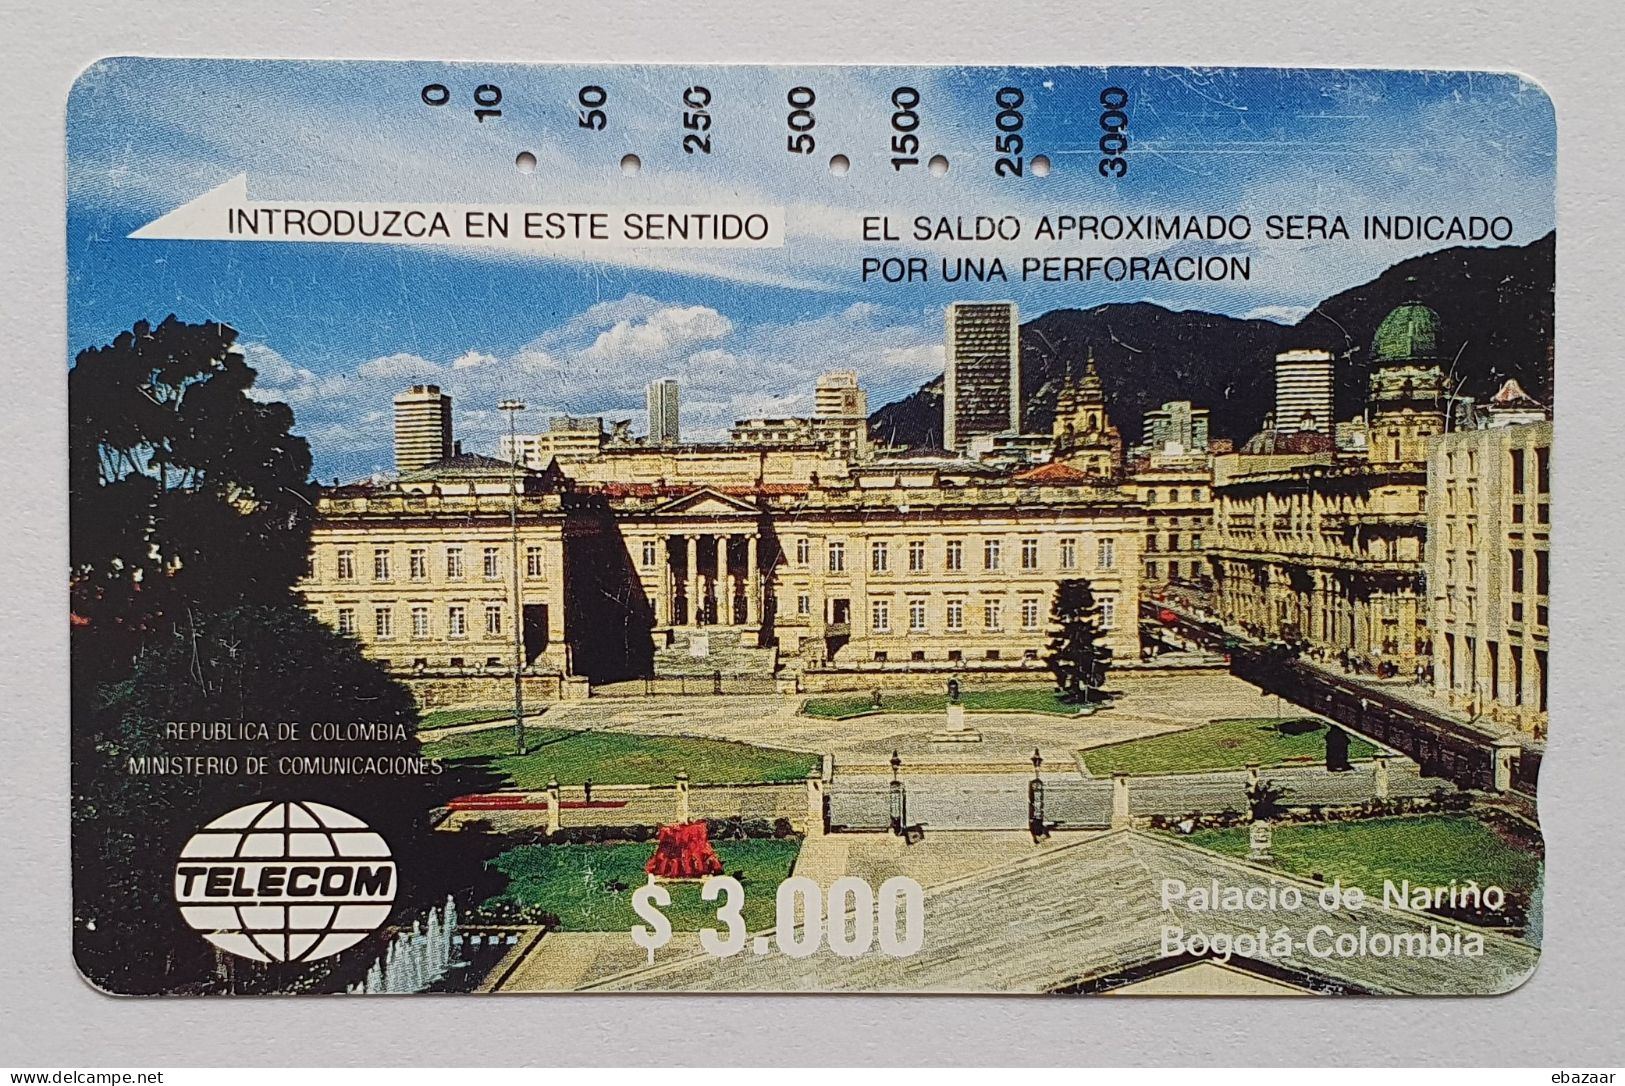 Colombia Narino Palace, Bogota $3.000 Phonecard Used - Colombie